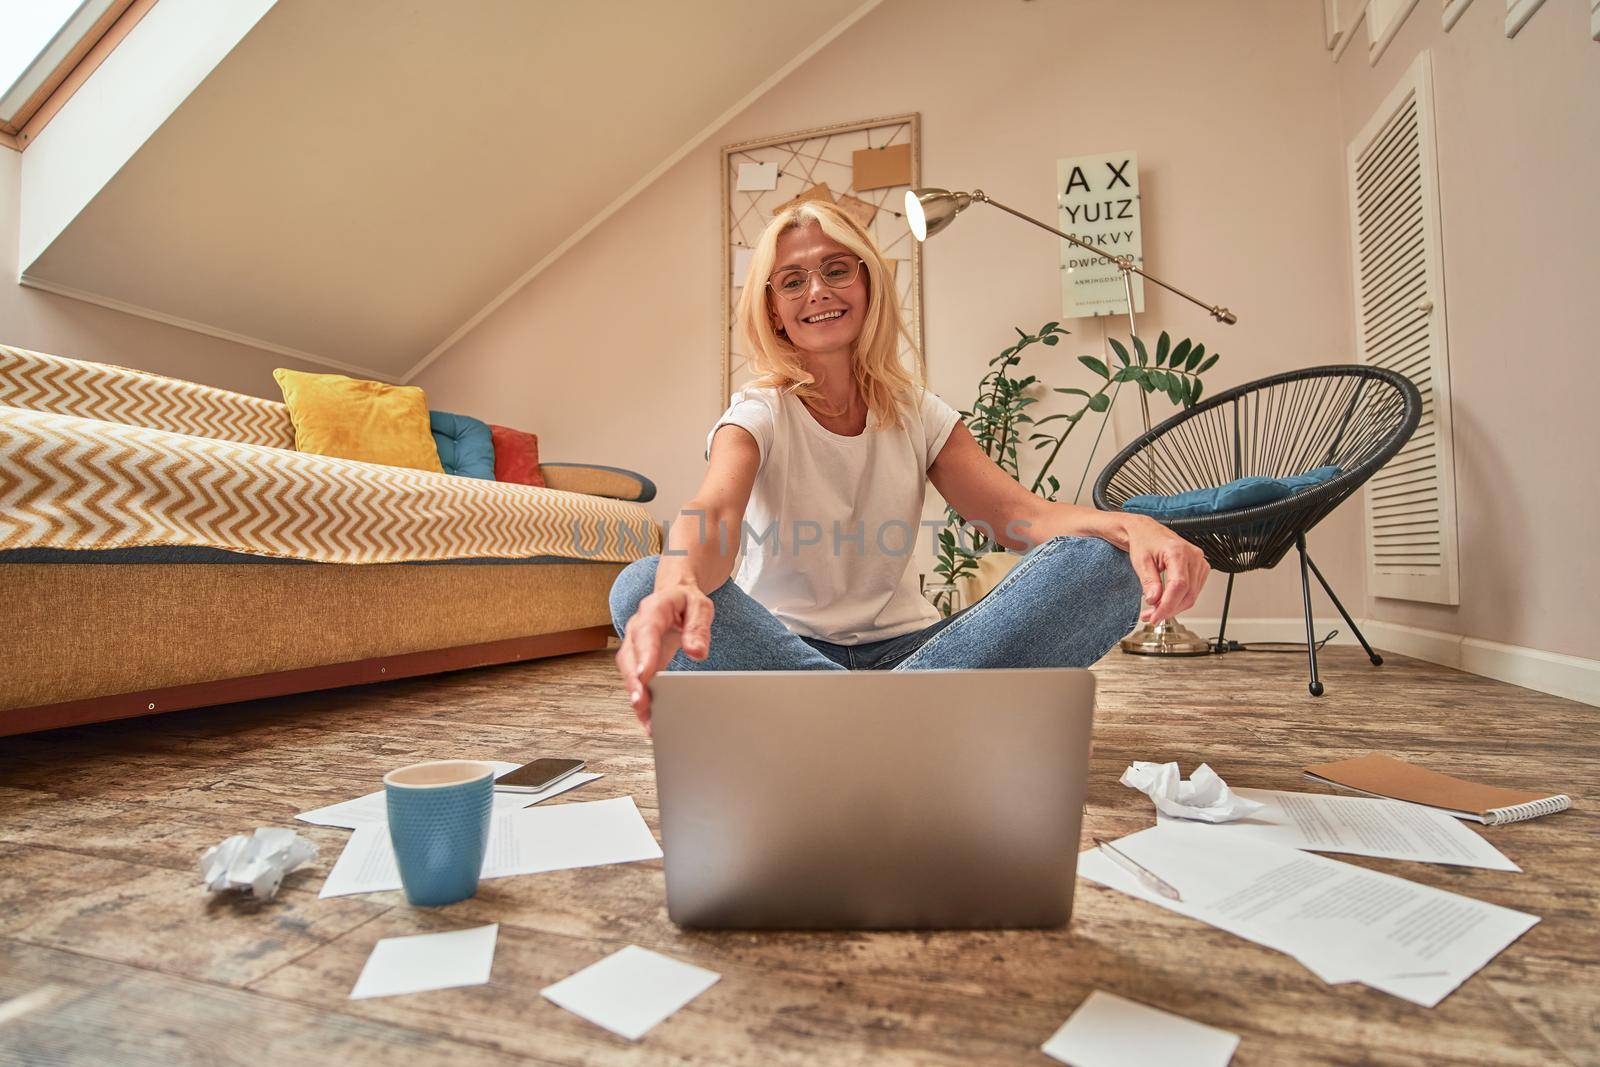 Smiling middle aged caucasian woman working on floor with laptop and papers in modern apartment. Working from home concept